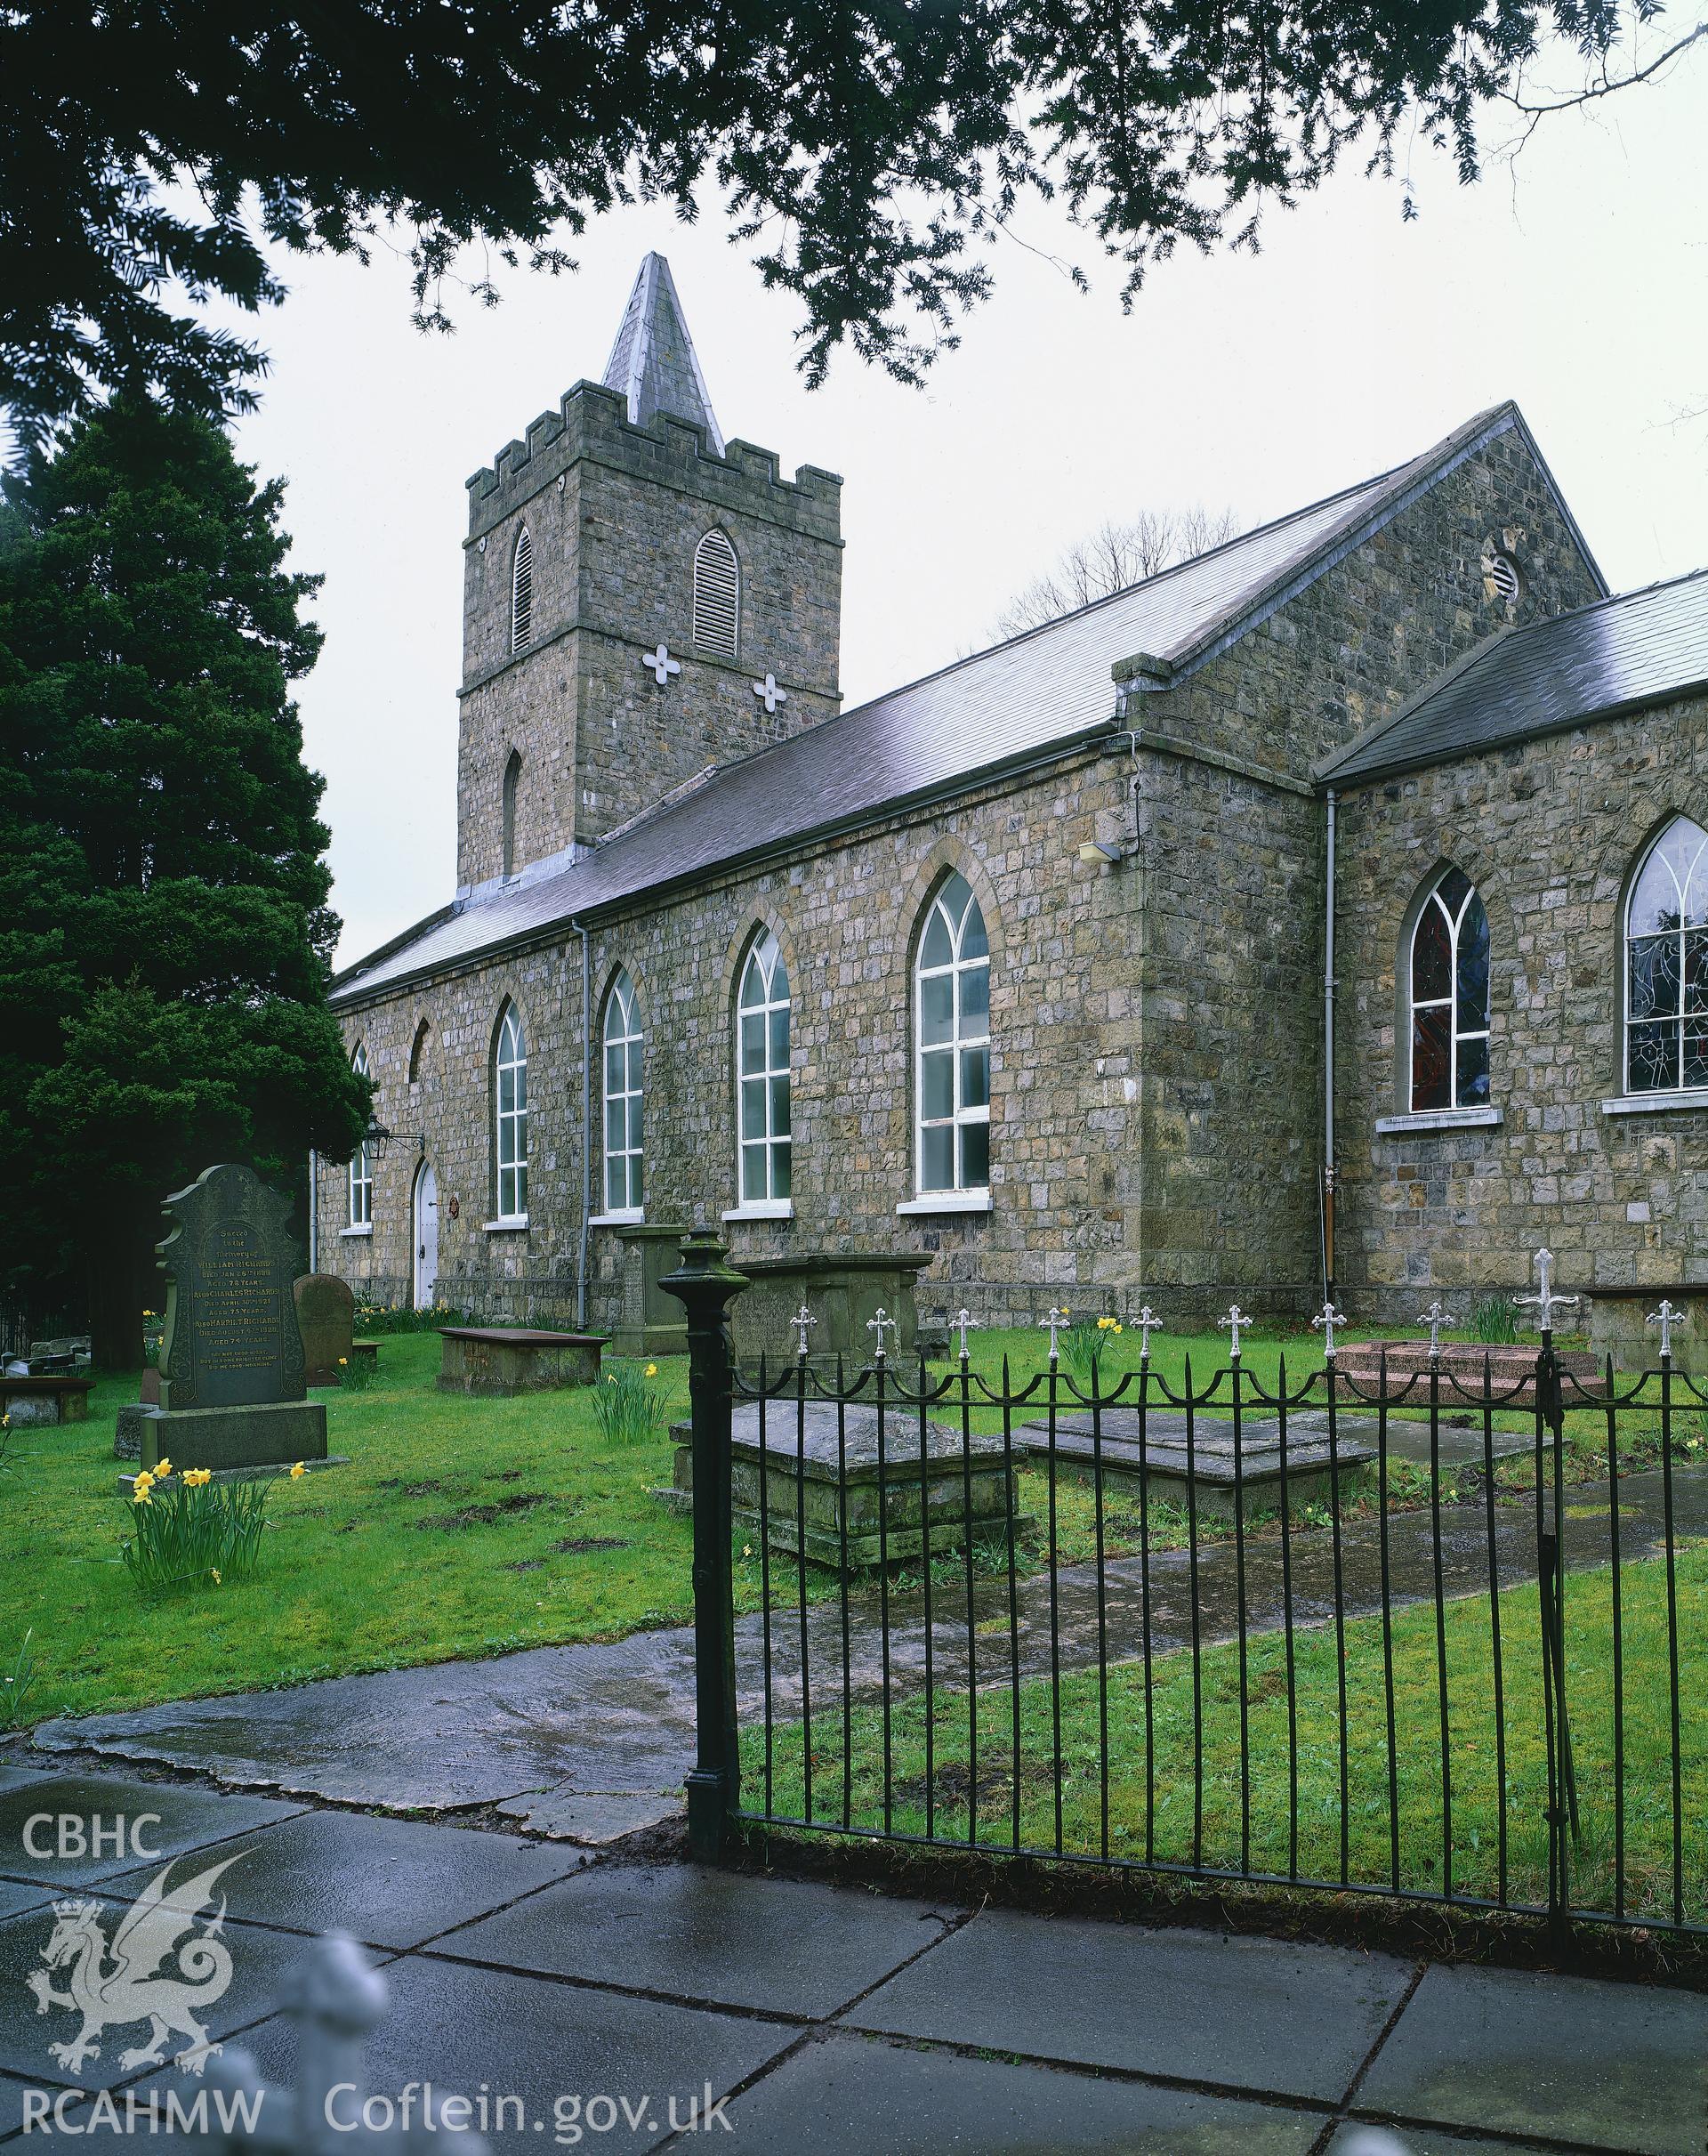 RCAHMW colour transparency showing view of St Peter's Church, Blaenavon